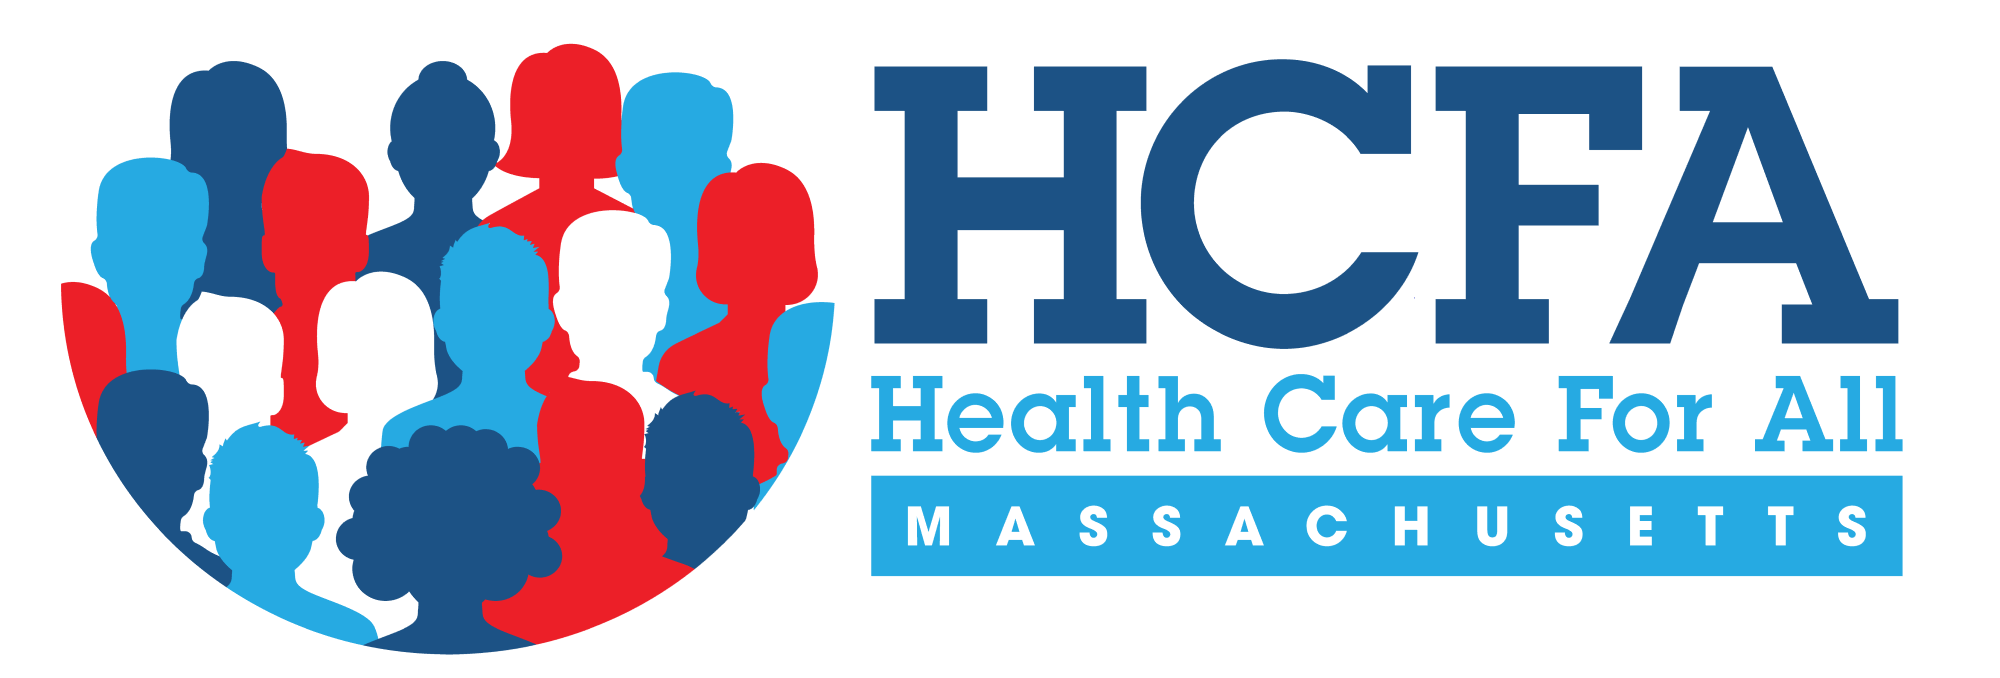 PRESS STATEMENT: Health Care For All Congratulates New Health and Human Services Secretary Kate Walsh